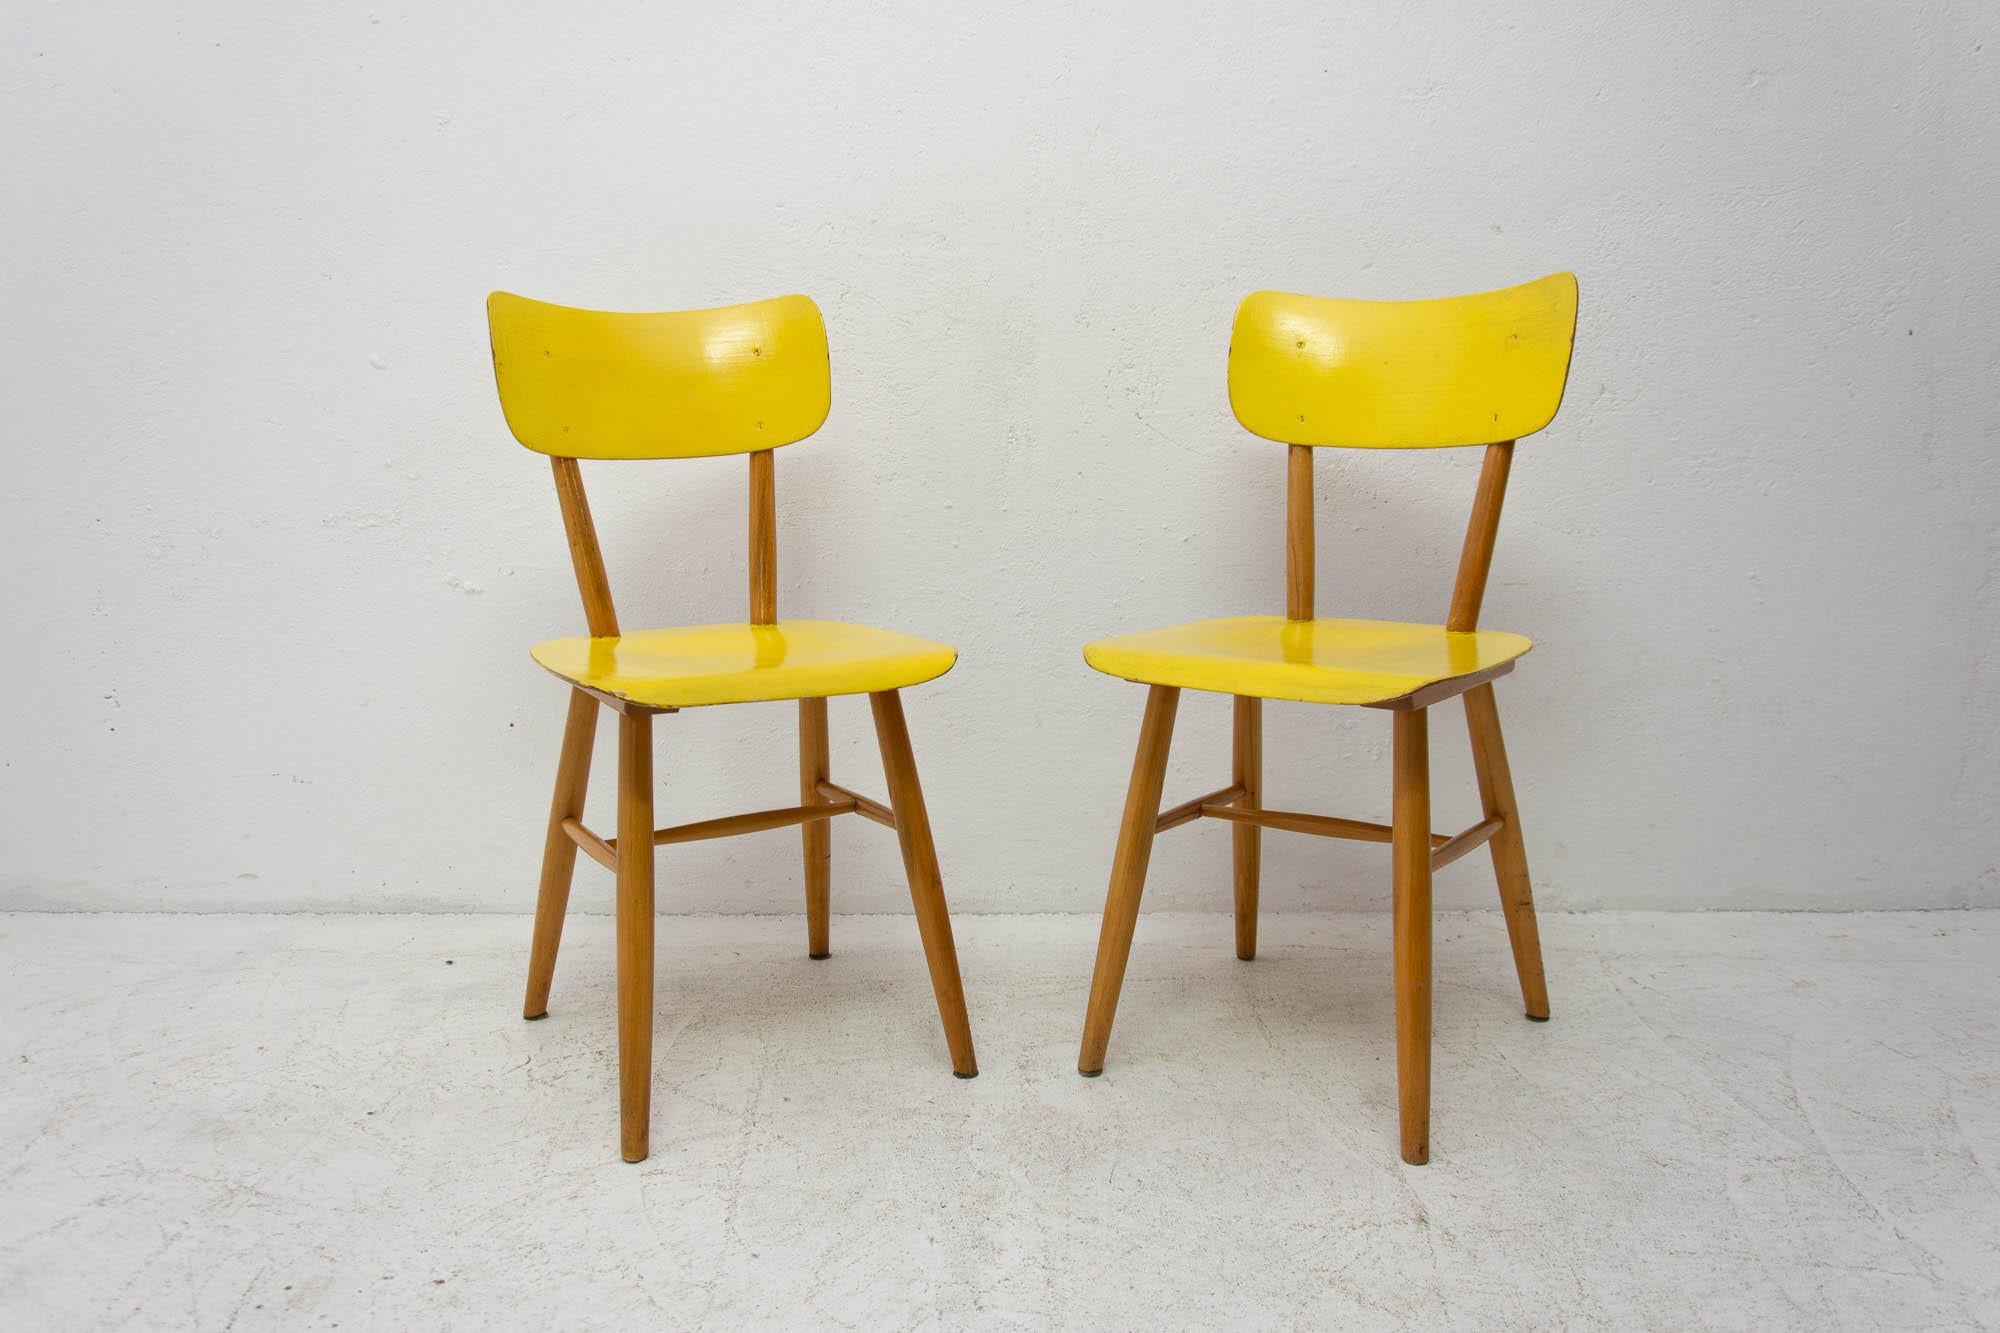 Pair of patinated dining chairs from the 1960s. It was made by TON company in the former Czechoslovakia.

TON company was established as successor to the famous Thonet after World War II in Czechoslovakia and continued the production of bentwood